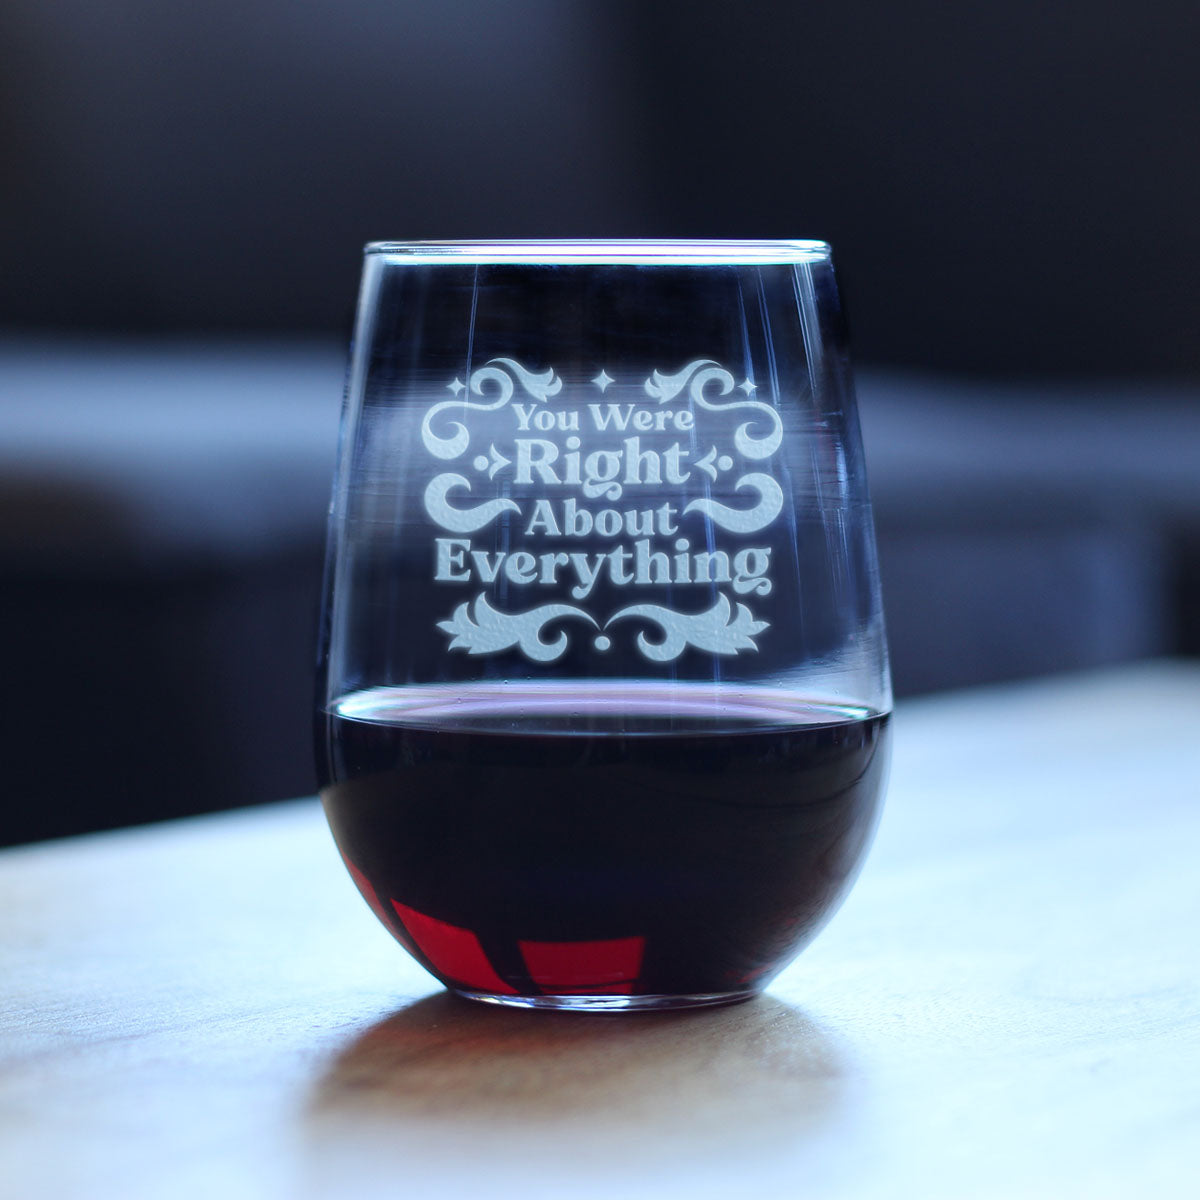 You Were Right About Everything - Funny Stemless Wine Glass - Cute Mothers Day or Birthday Gifts for Mom - Large 17 Ounce